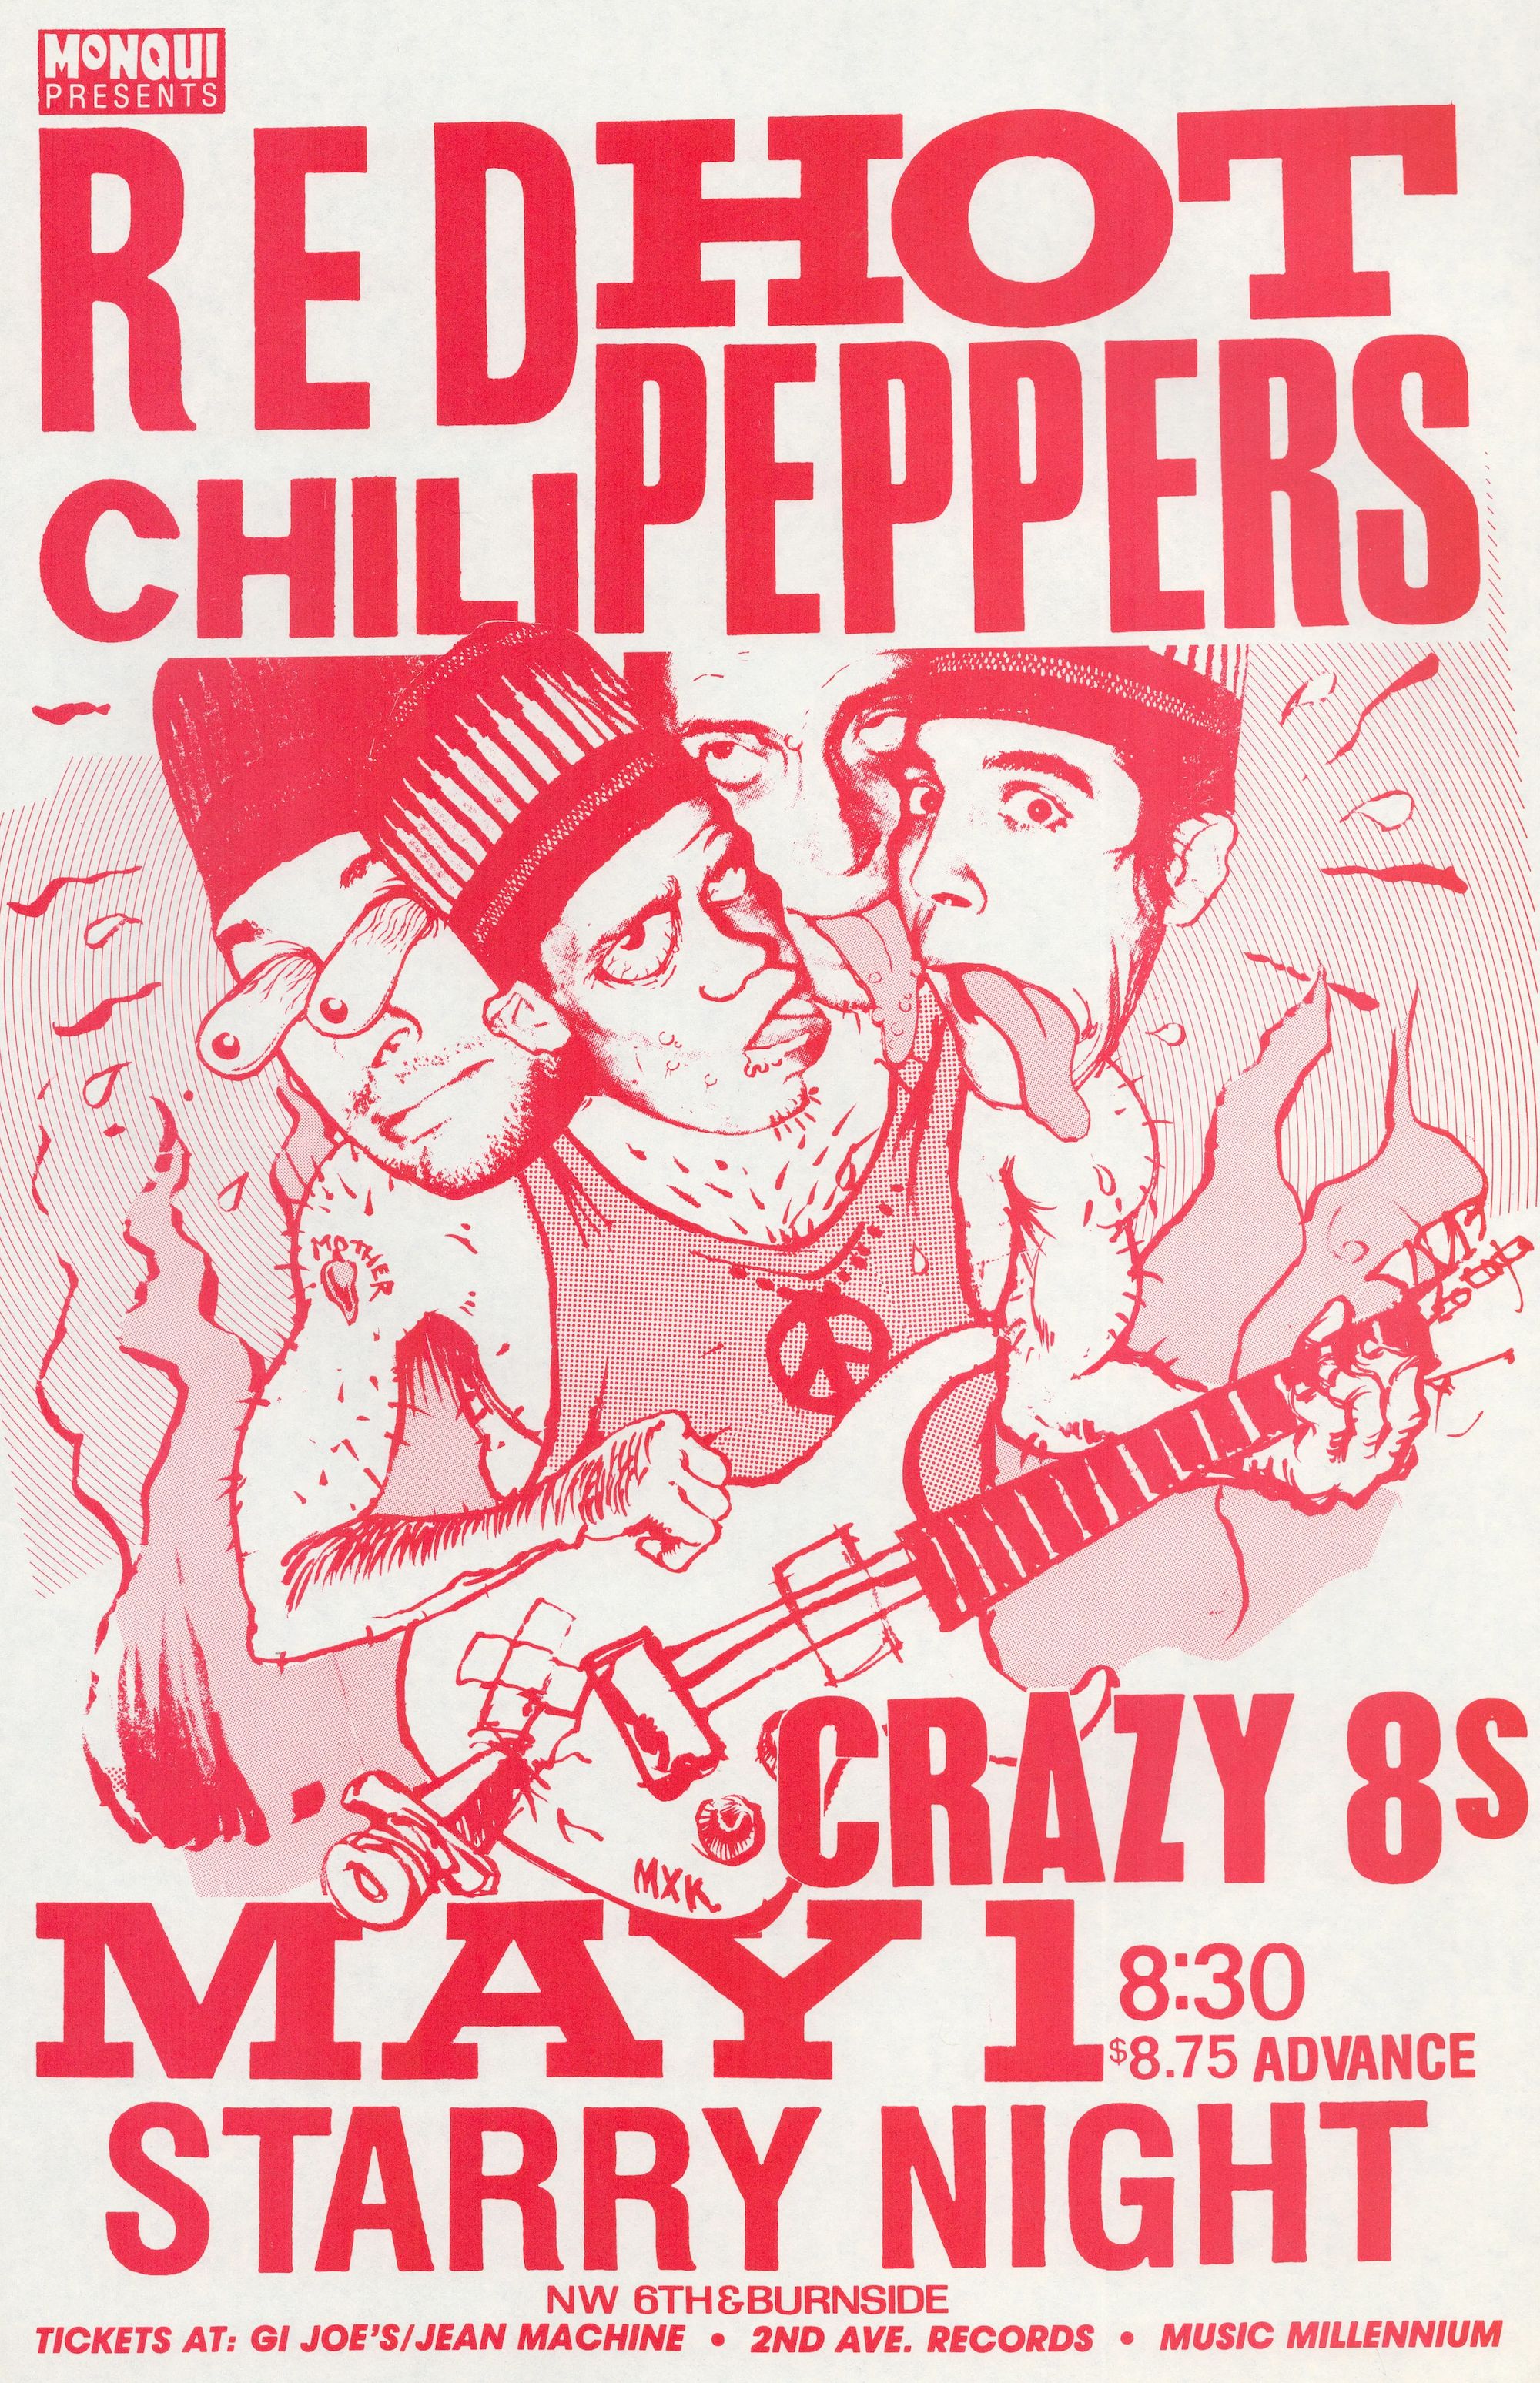 MXP-38.1 Red Hot Chili Peppers Starry Night 1985 Concert Poster